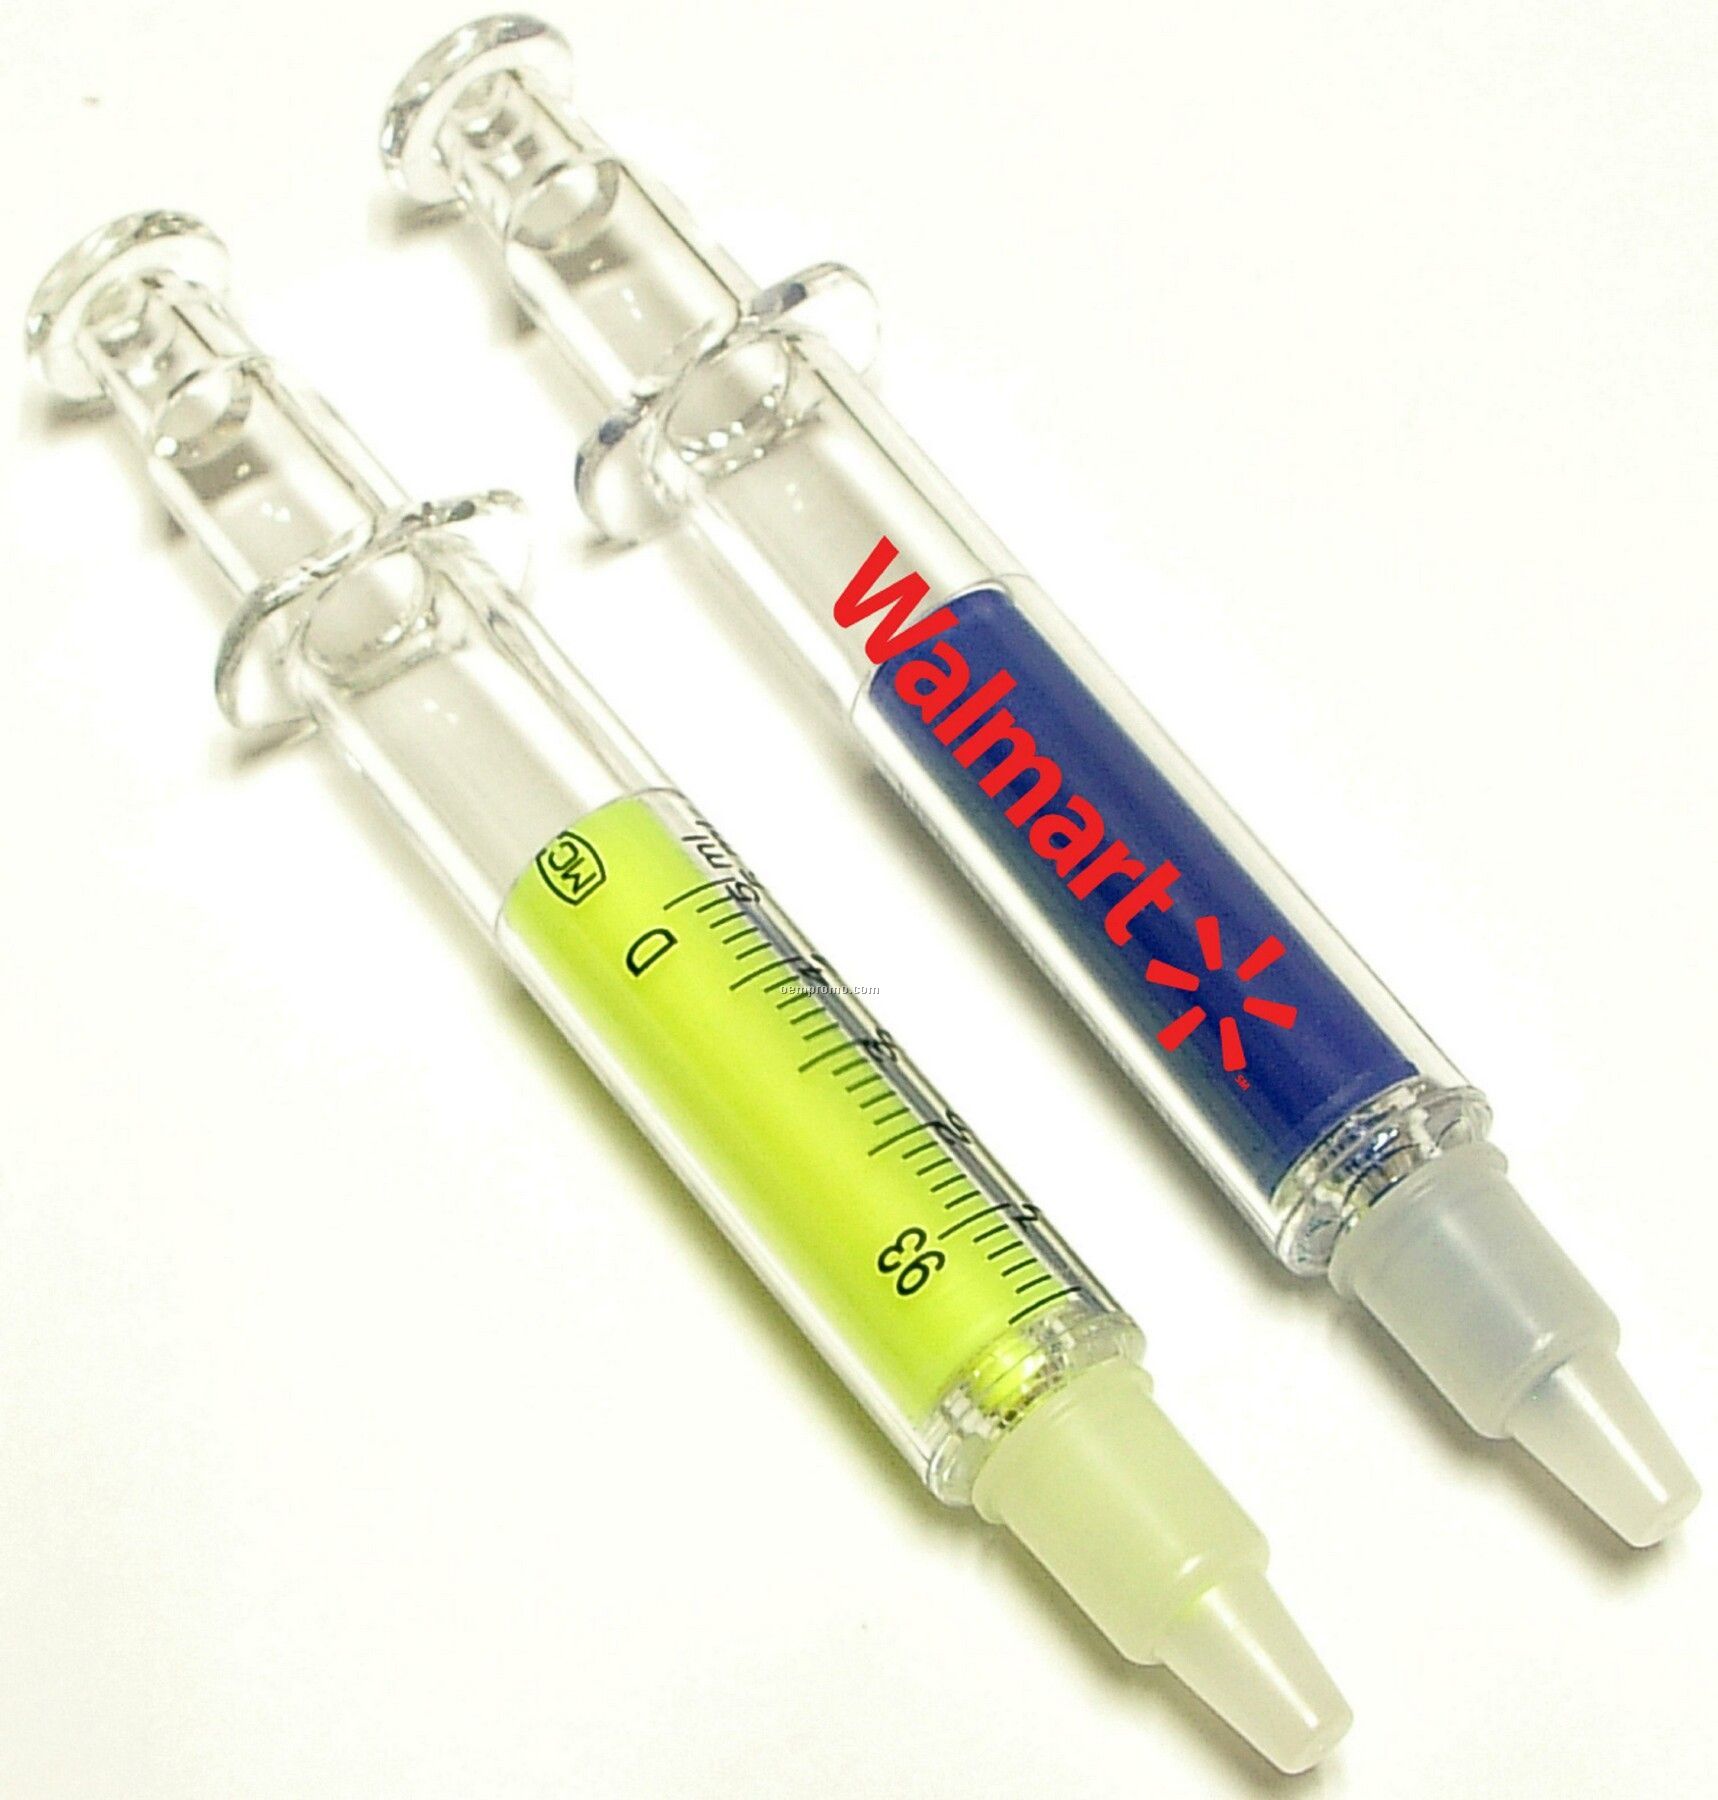 Syringe Shape Highlighter With Scale.